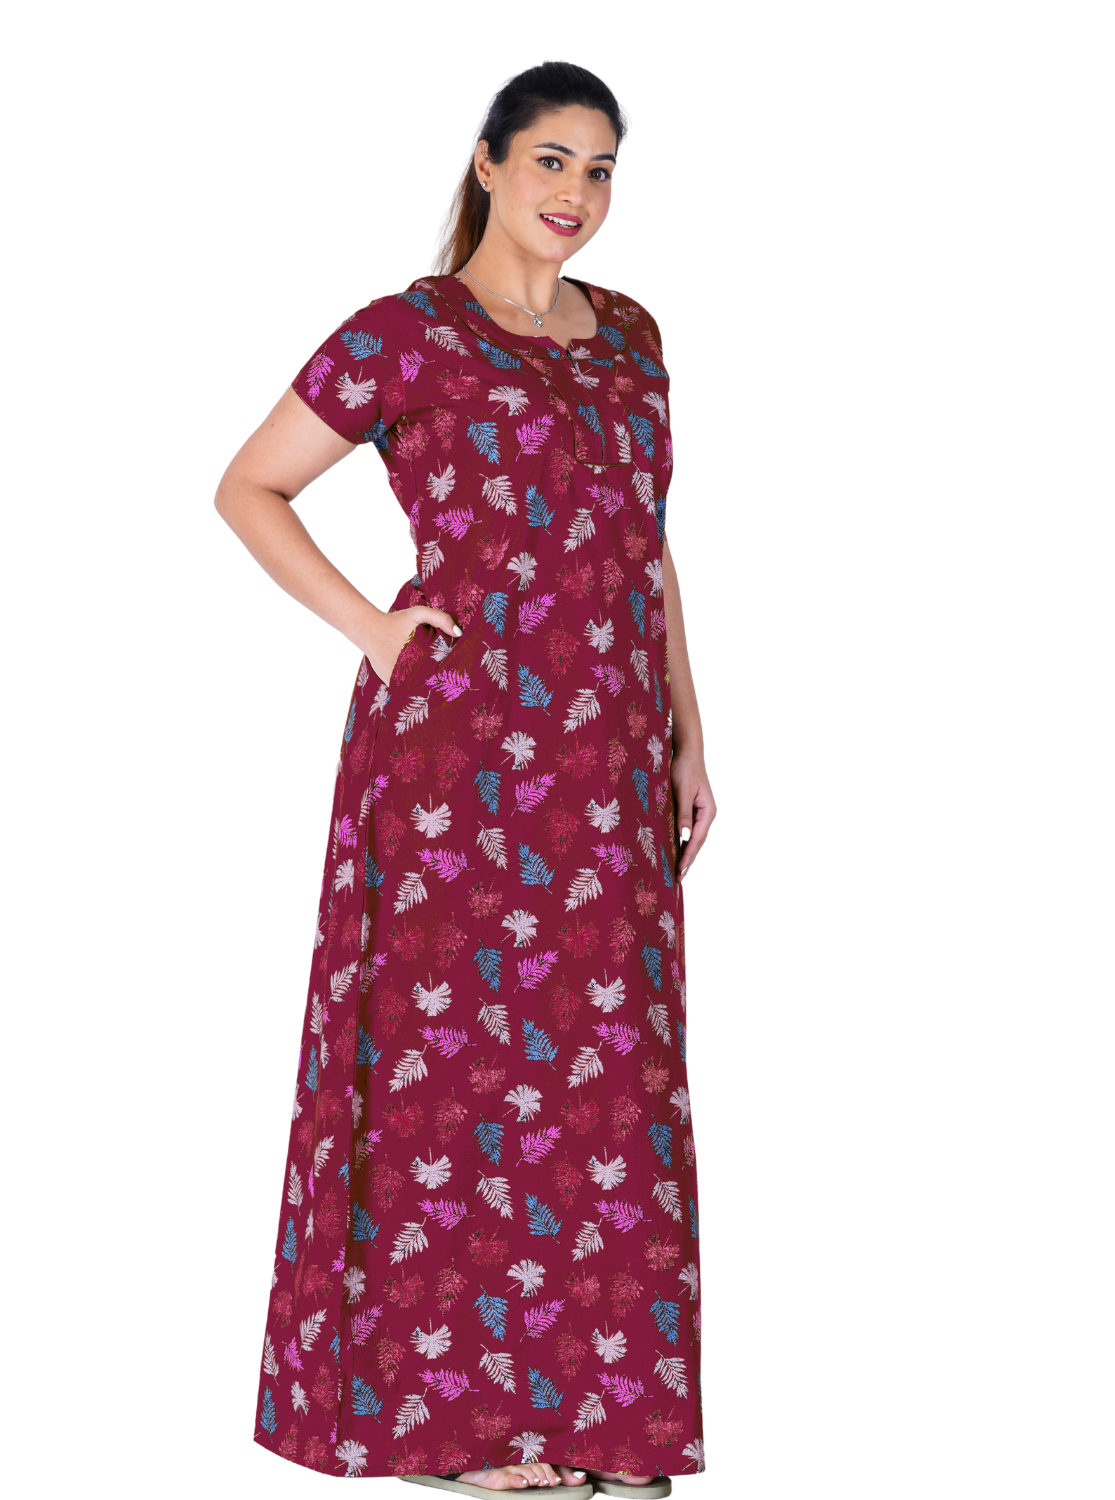 New MANGAI Premium Cotton Printed Nighties- All Over Printed Stylish Nightwear for Stylish Women | Updated Collection's